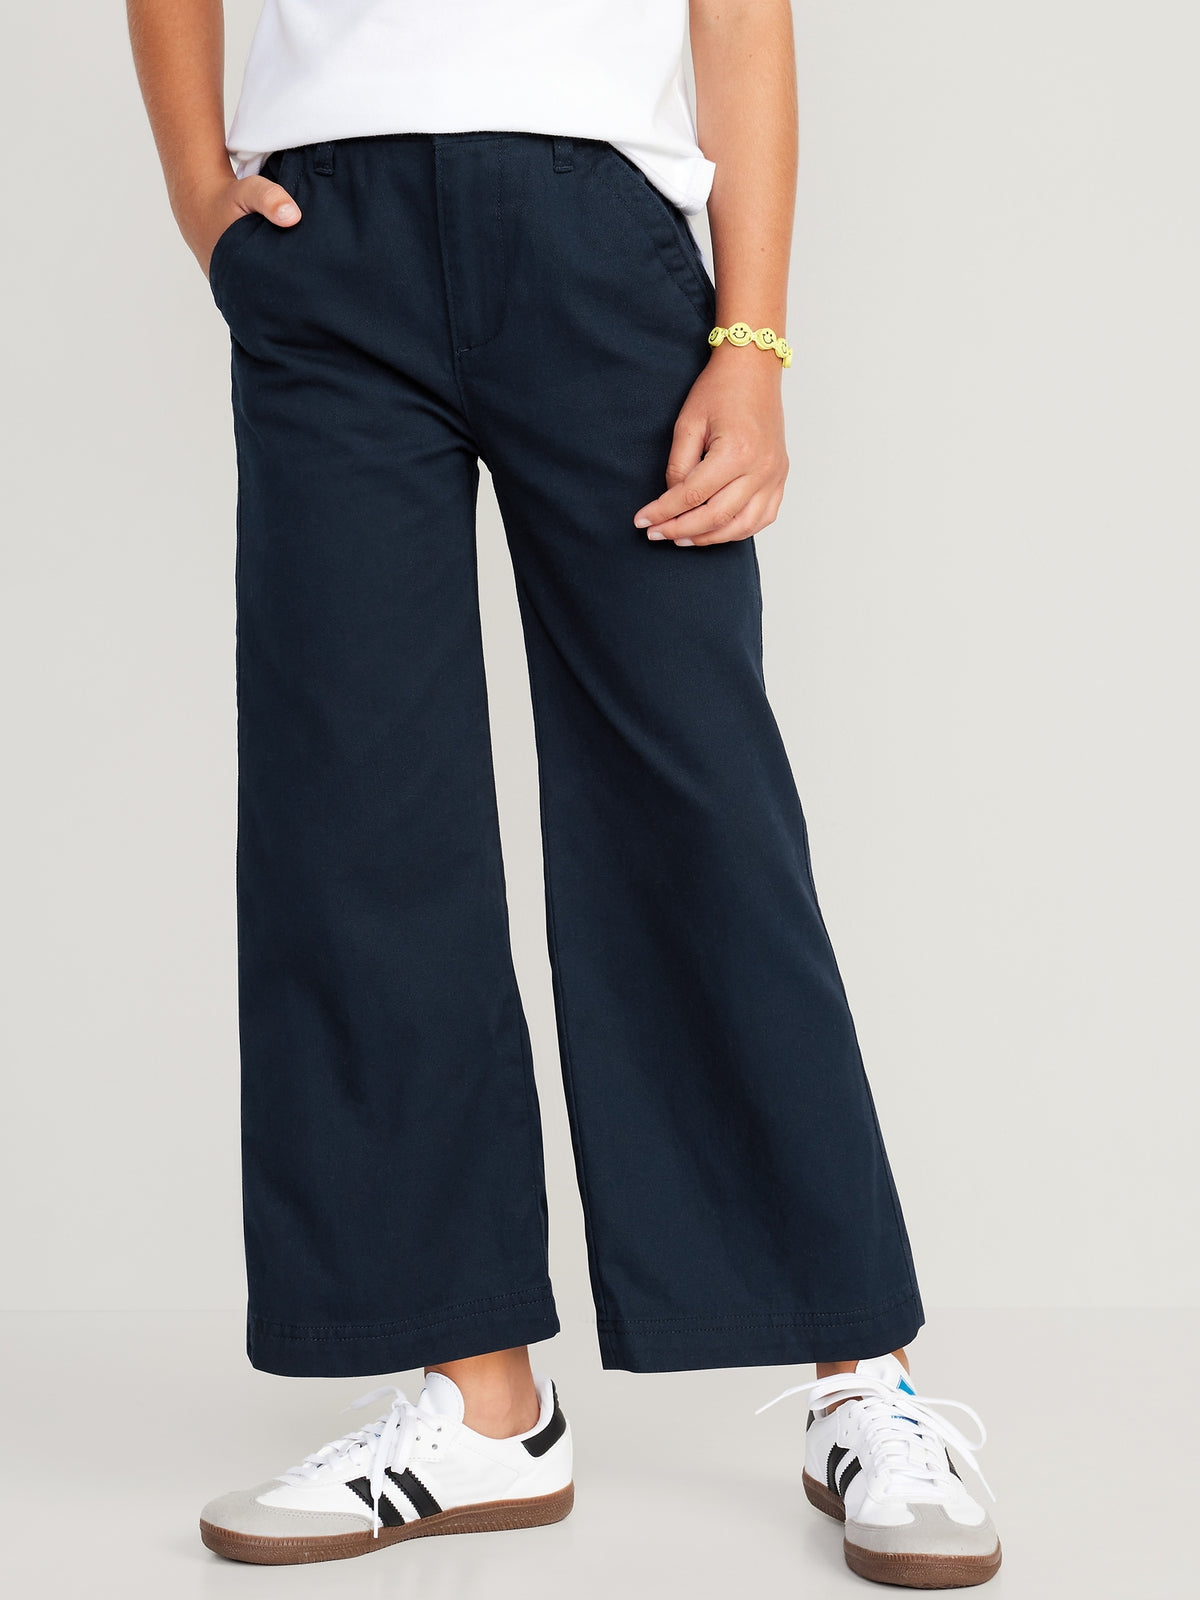 High-Waisted Wide-Leg School Uniform Pants for Girls - Old Navy Philippines